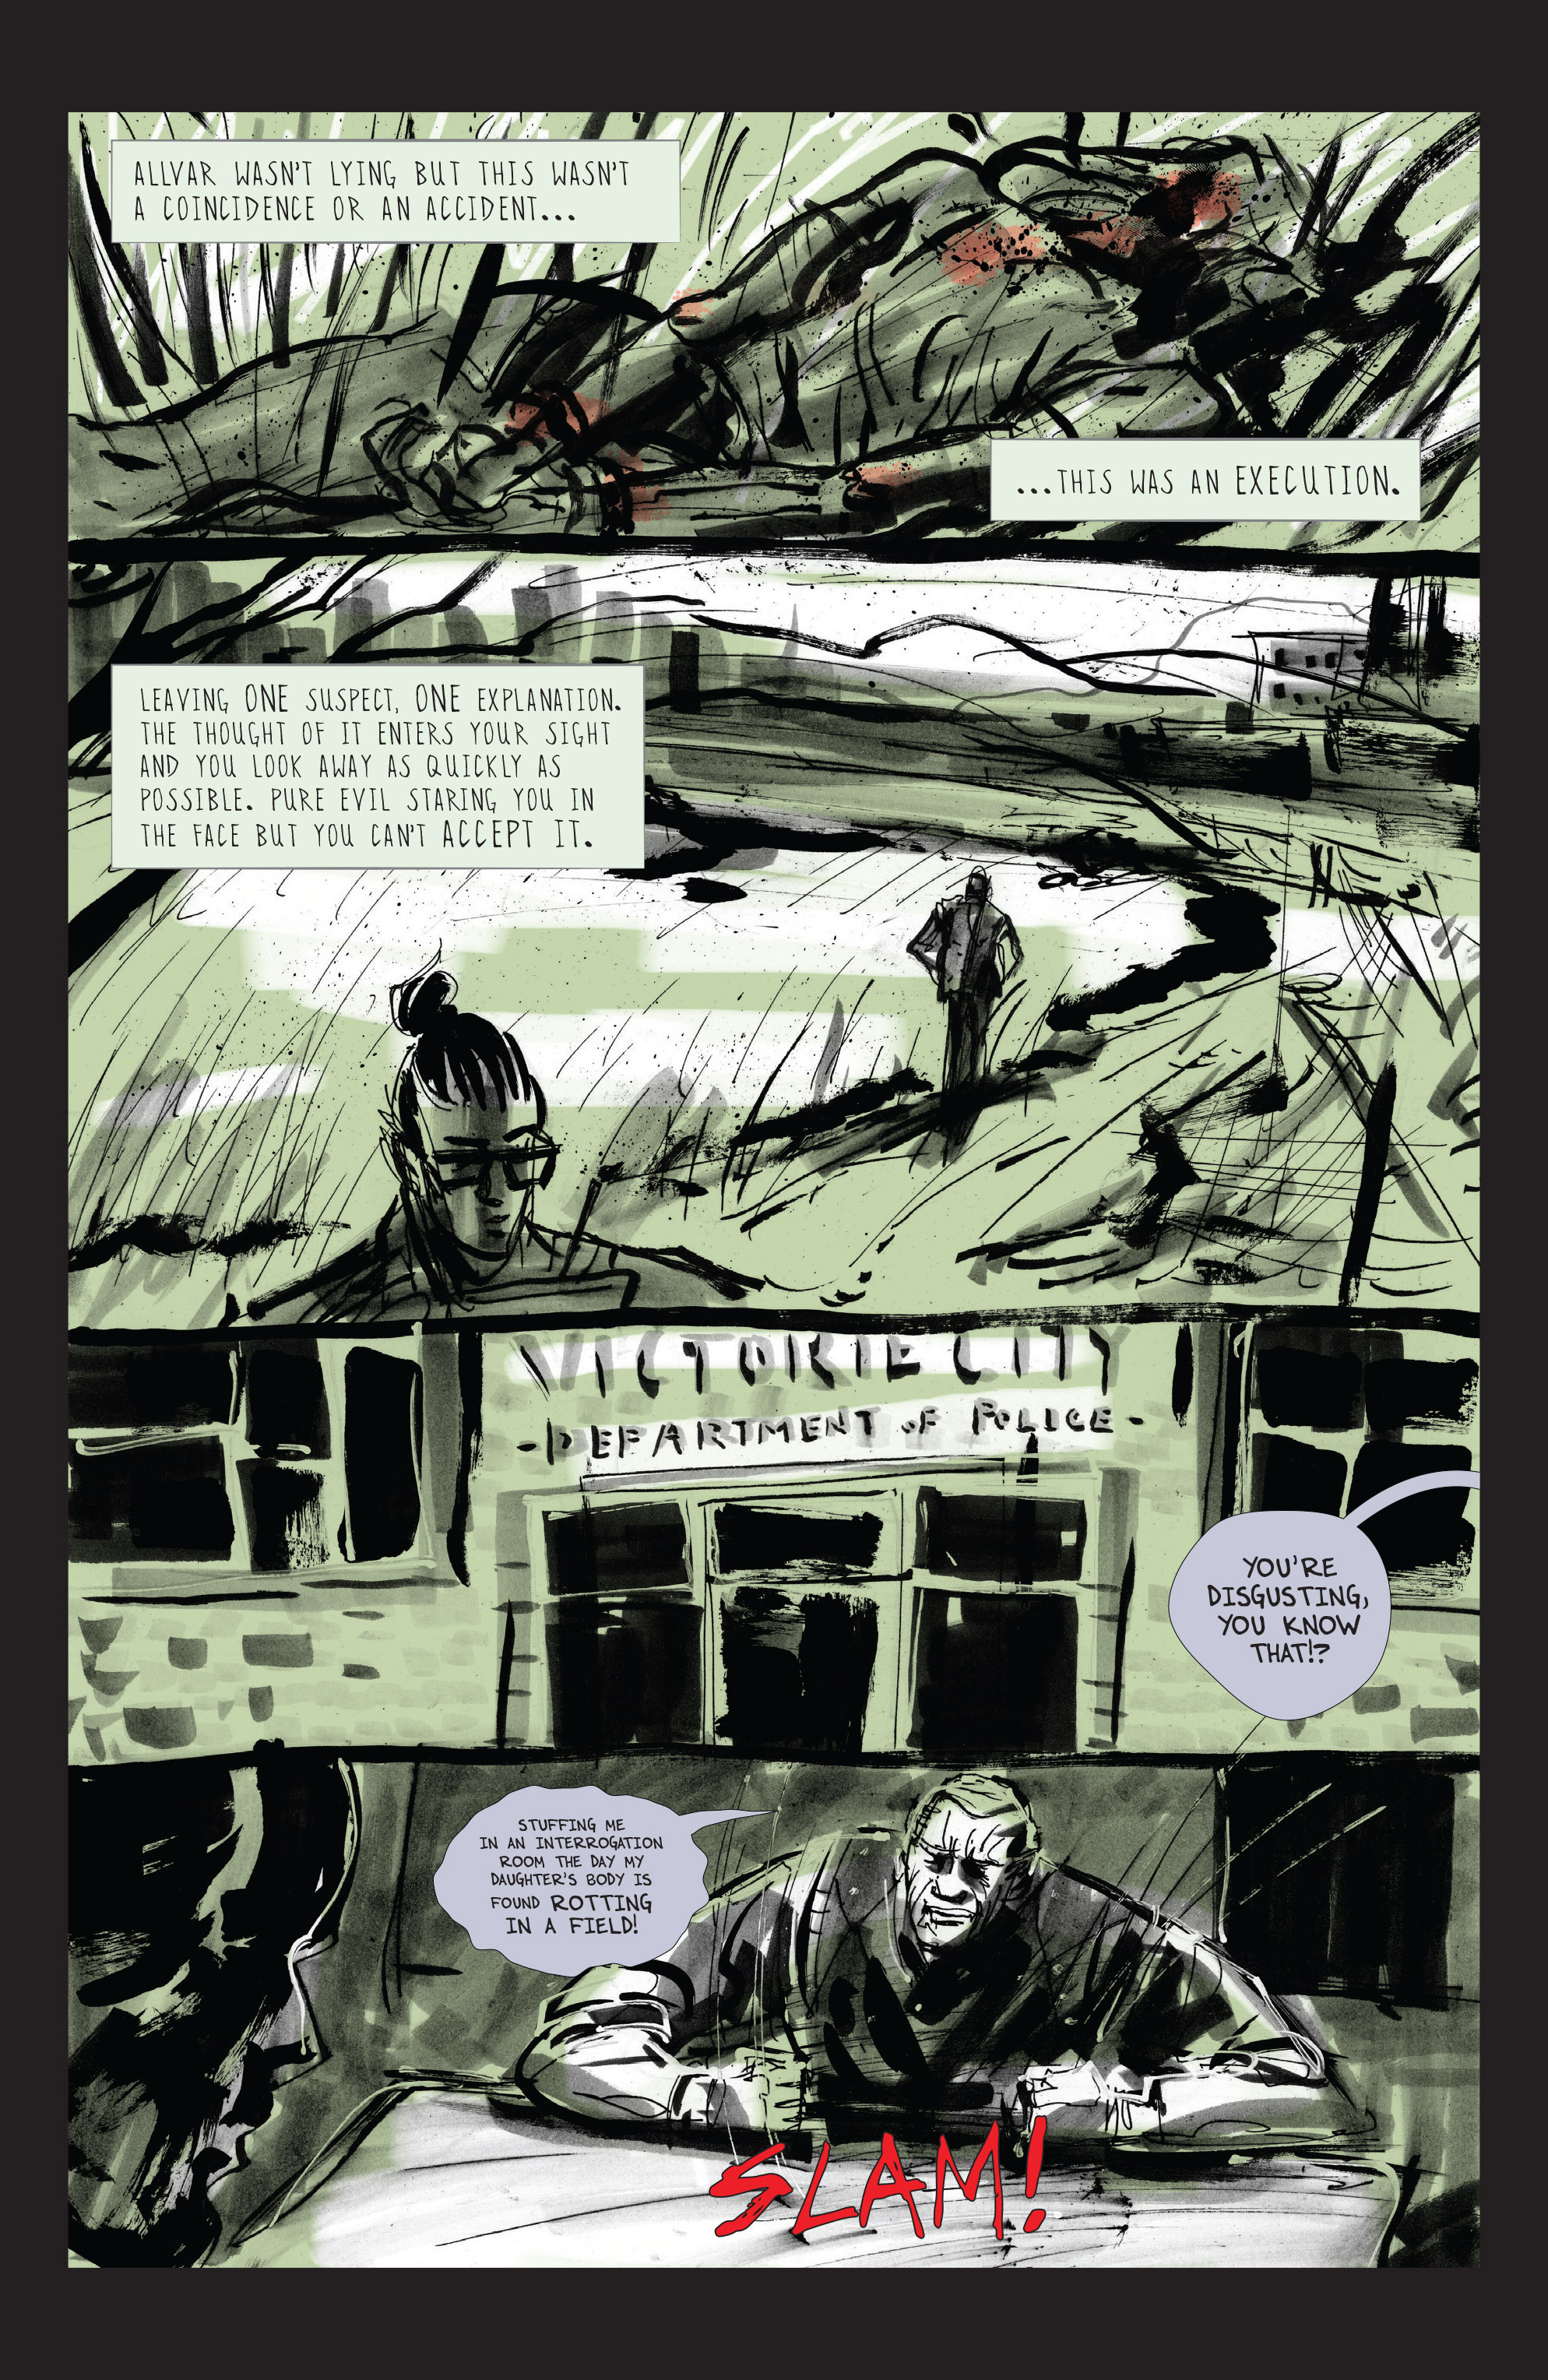 Read online Victorie City comic -  Issue #4 - 15